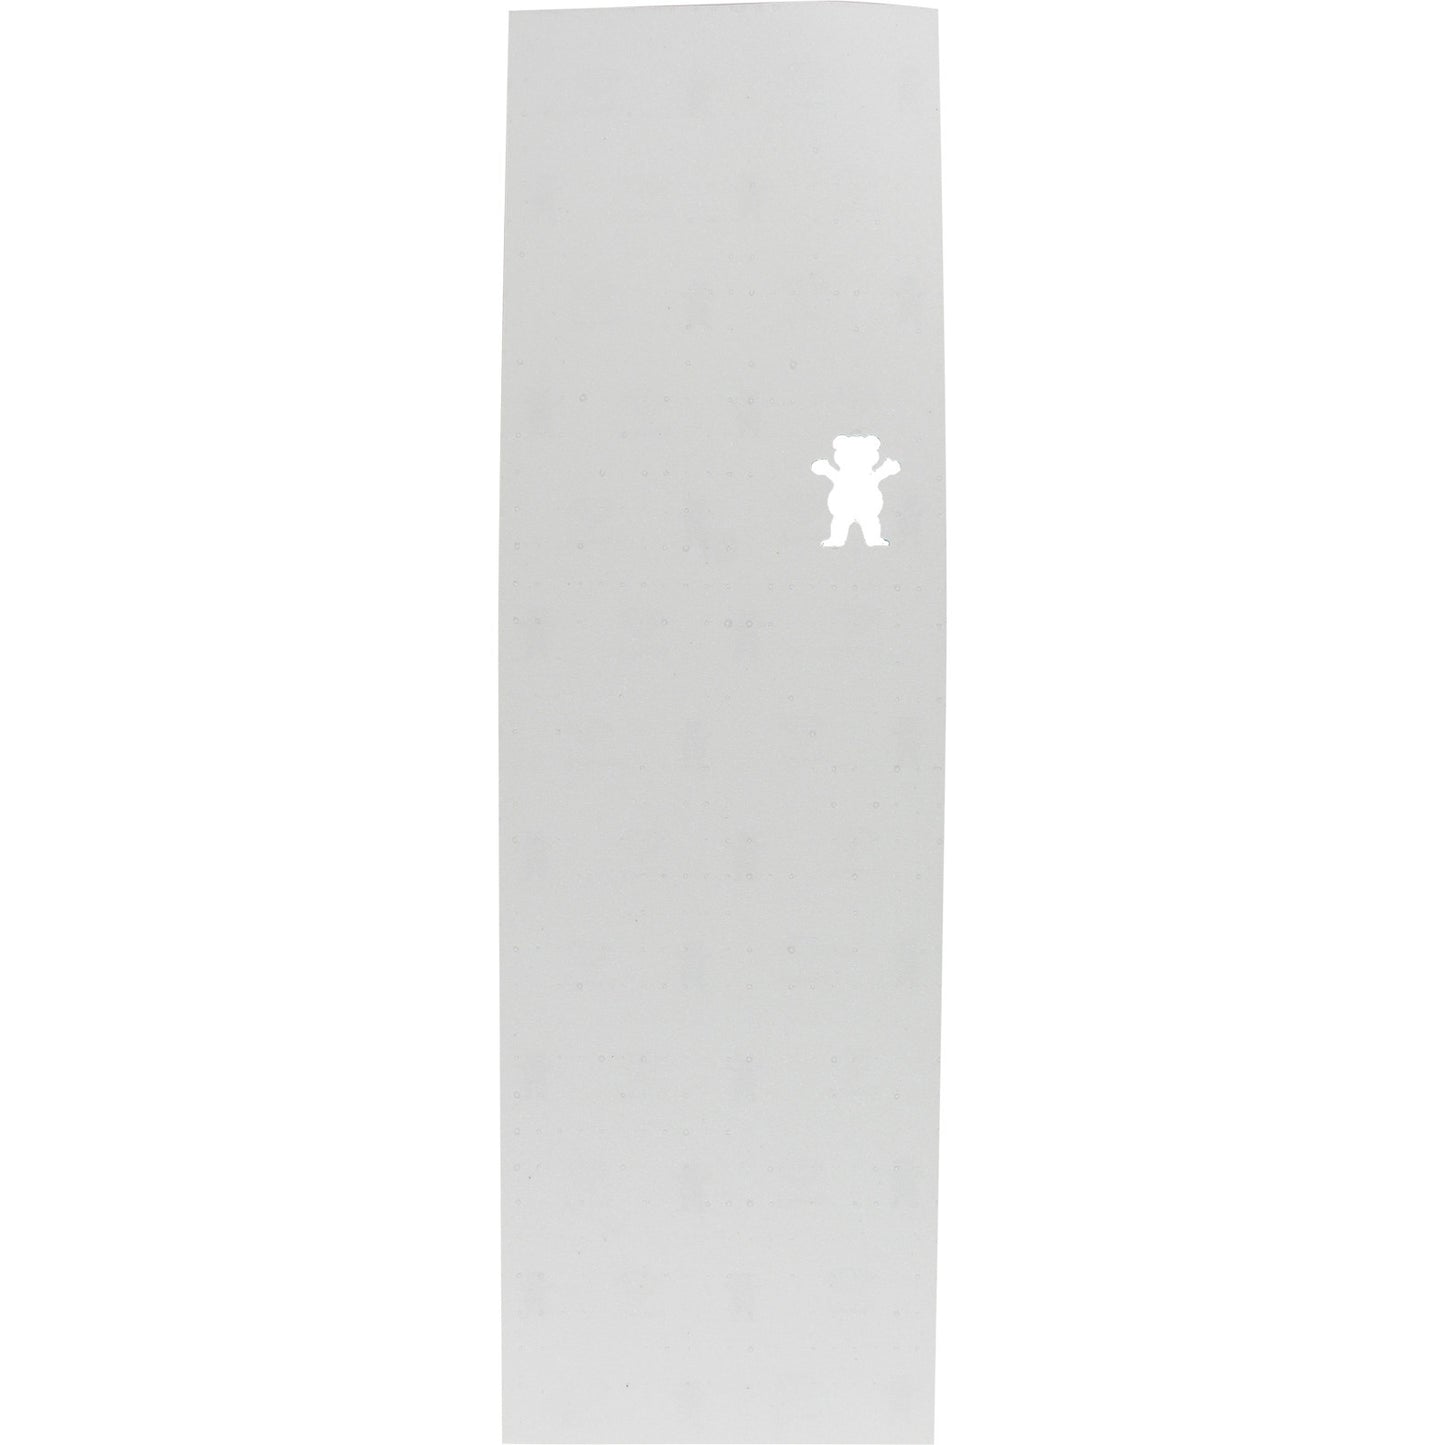 Grizzly Clear Bear Cutout Grip Tape - 10"x33" |Universo Extremo Boards Skate & Surf